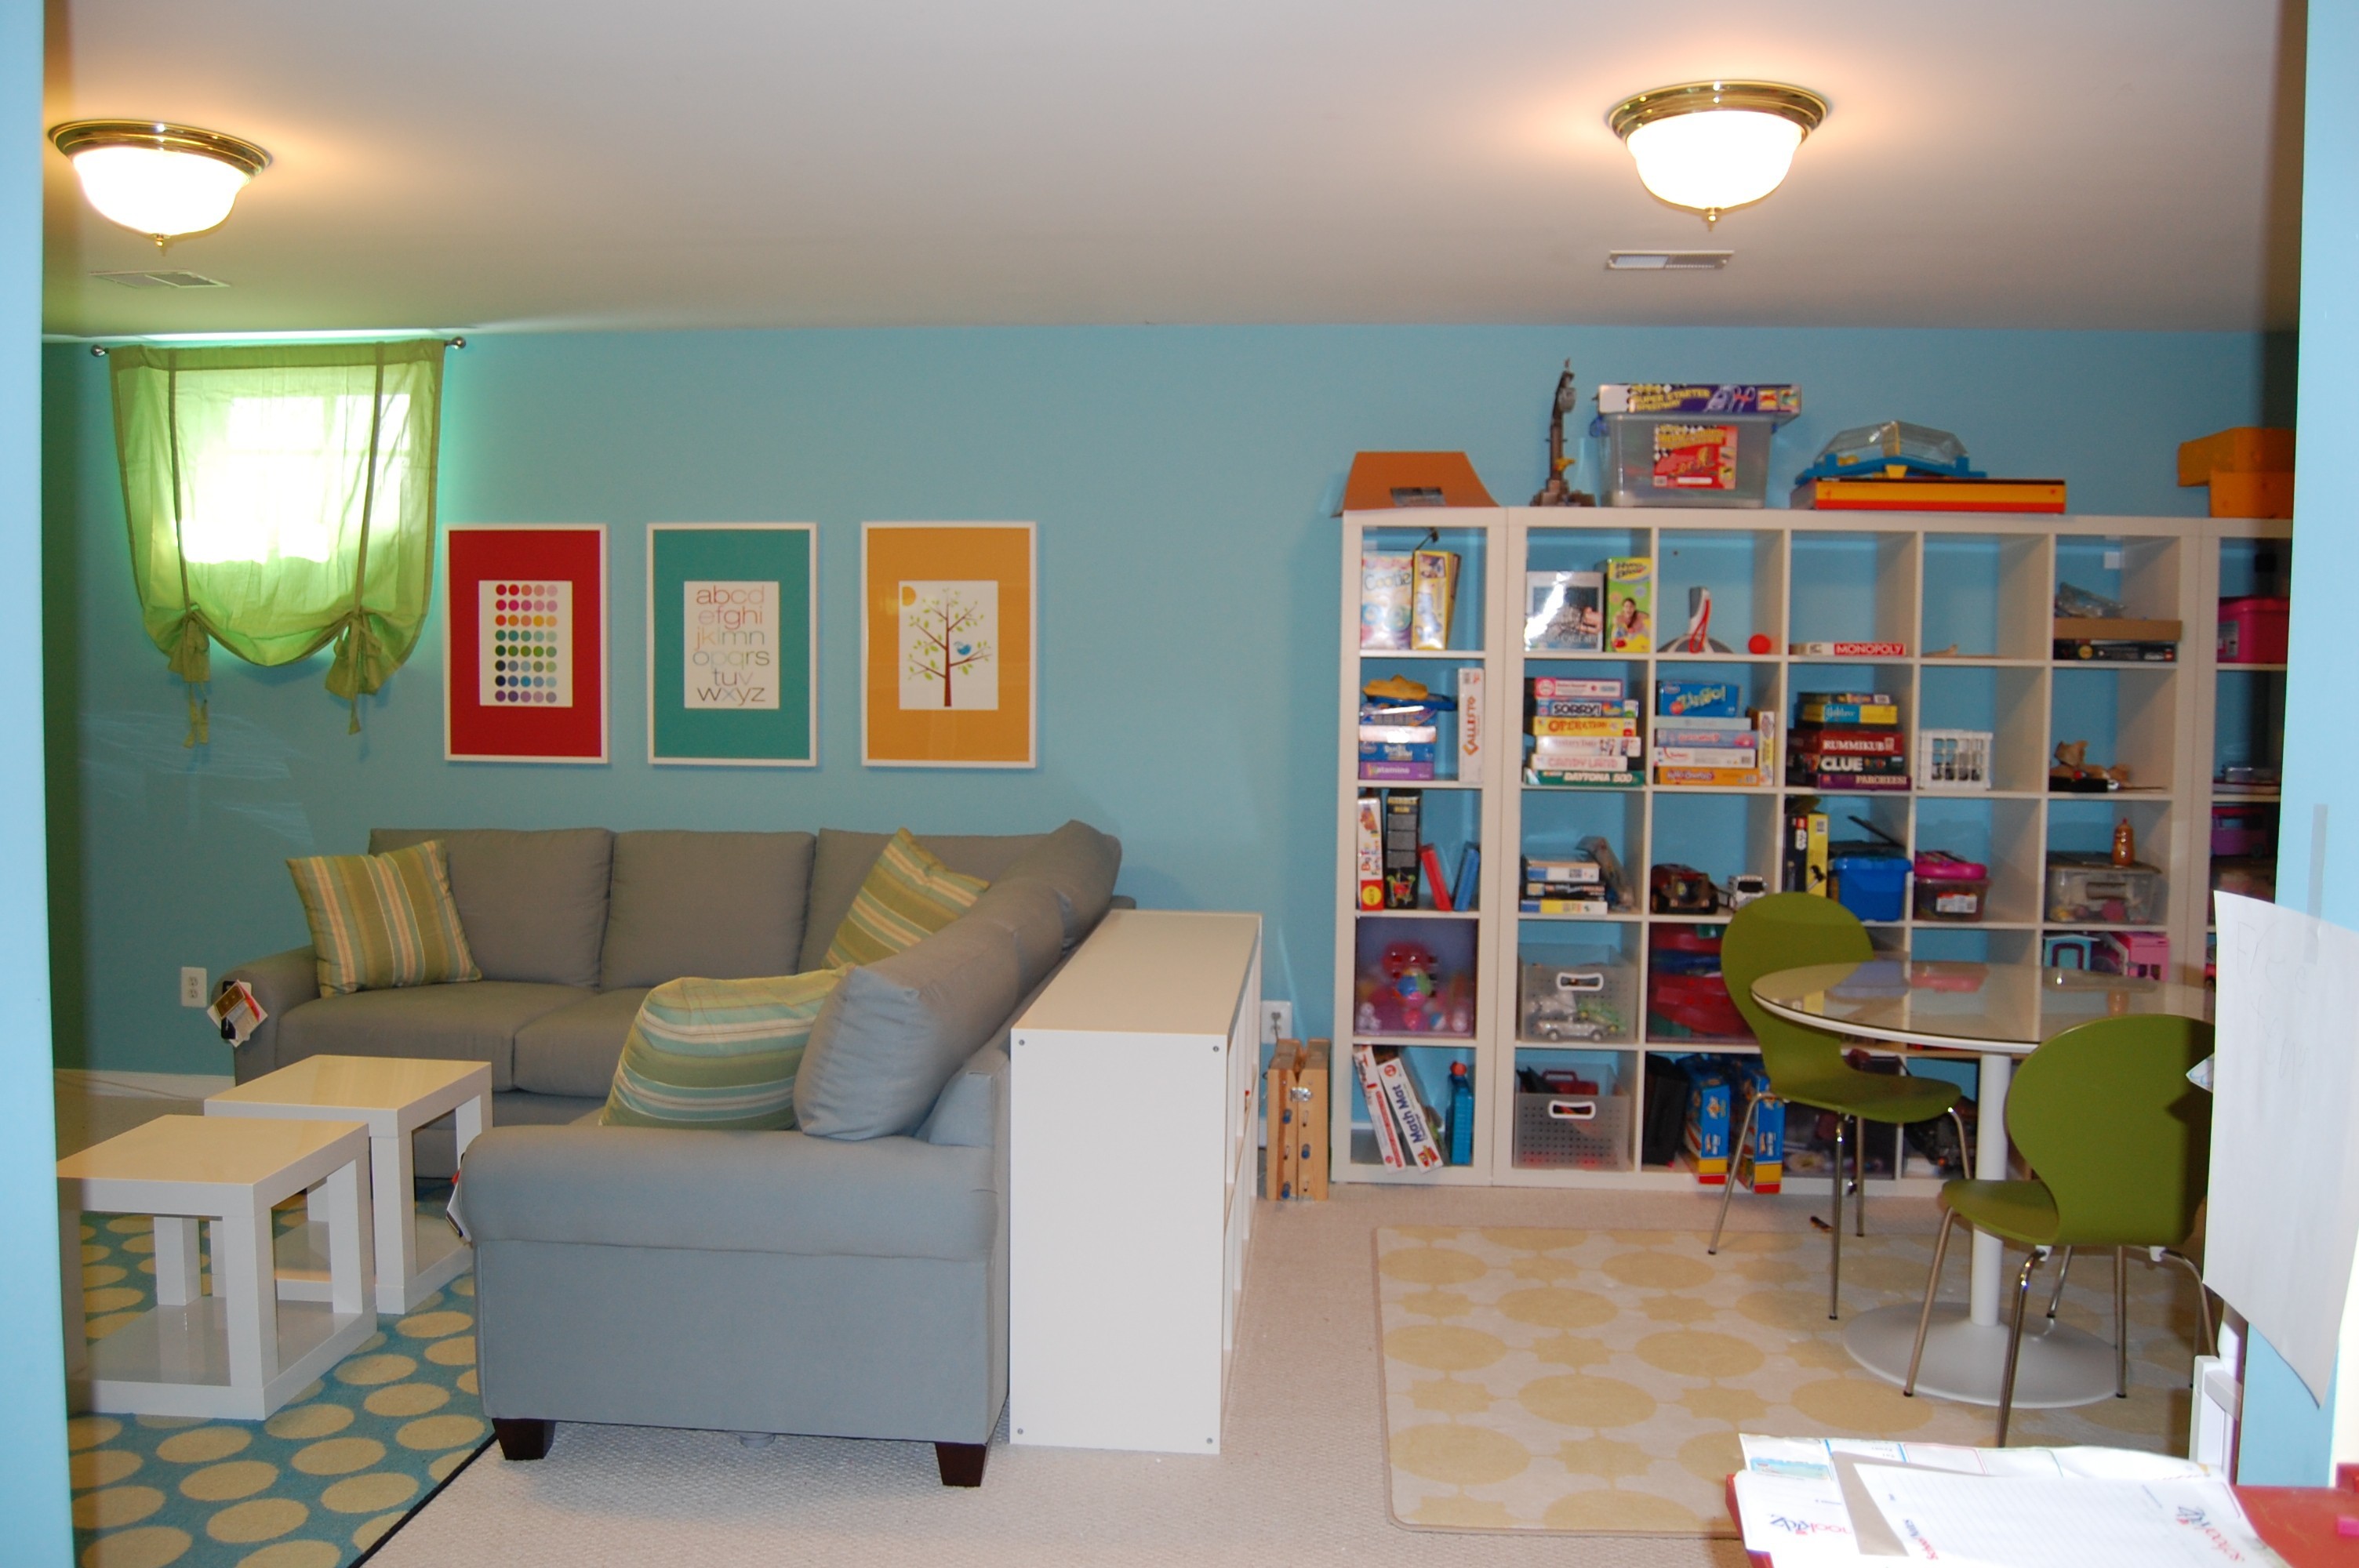 3008x2000 Pictures Of Playrooms Kids Room 1000 Images About Playroomfamily Room On  Pinterest Home Decor Ideas